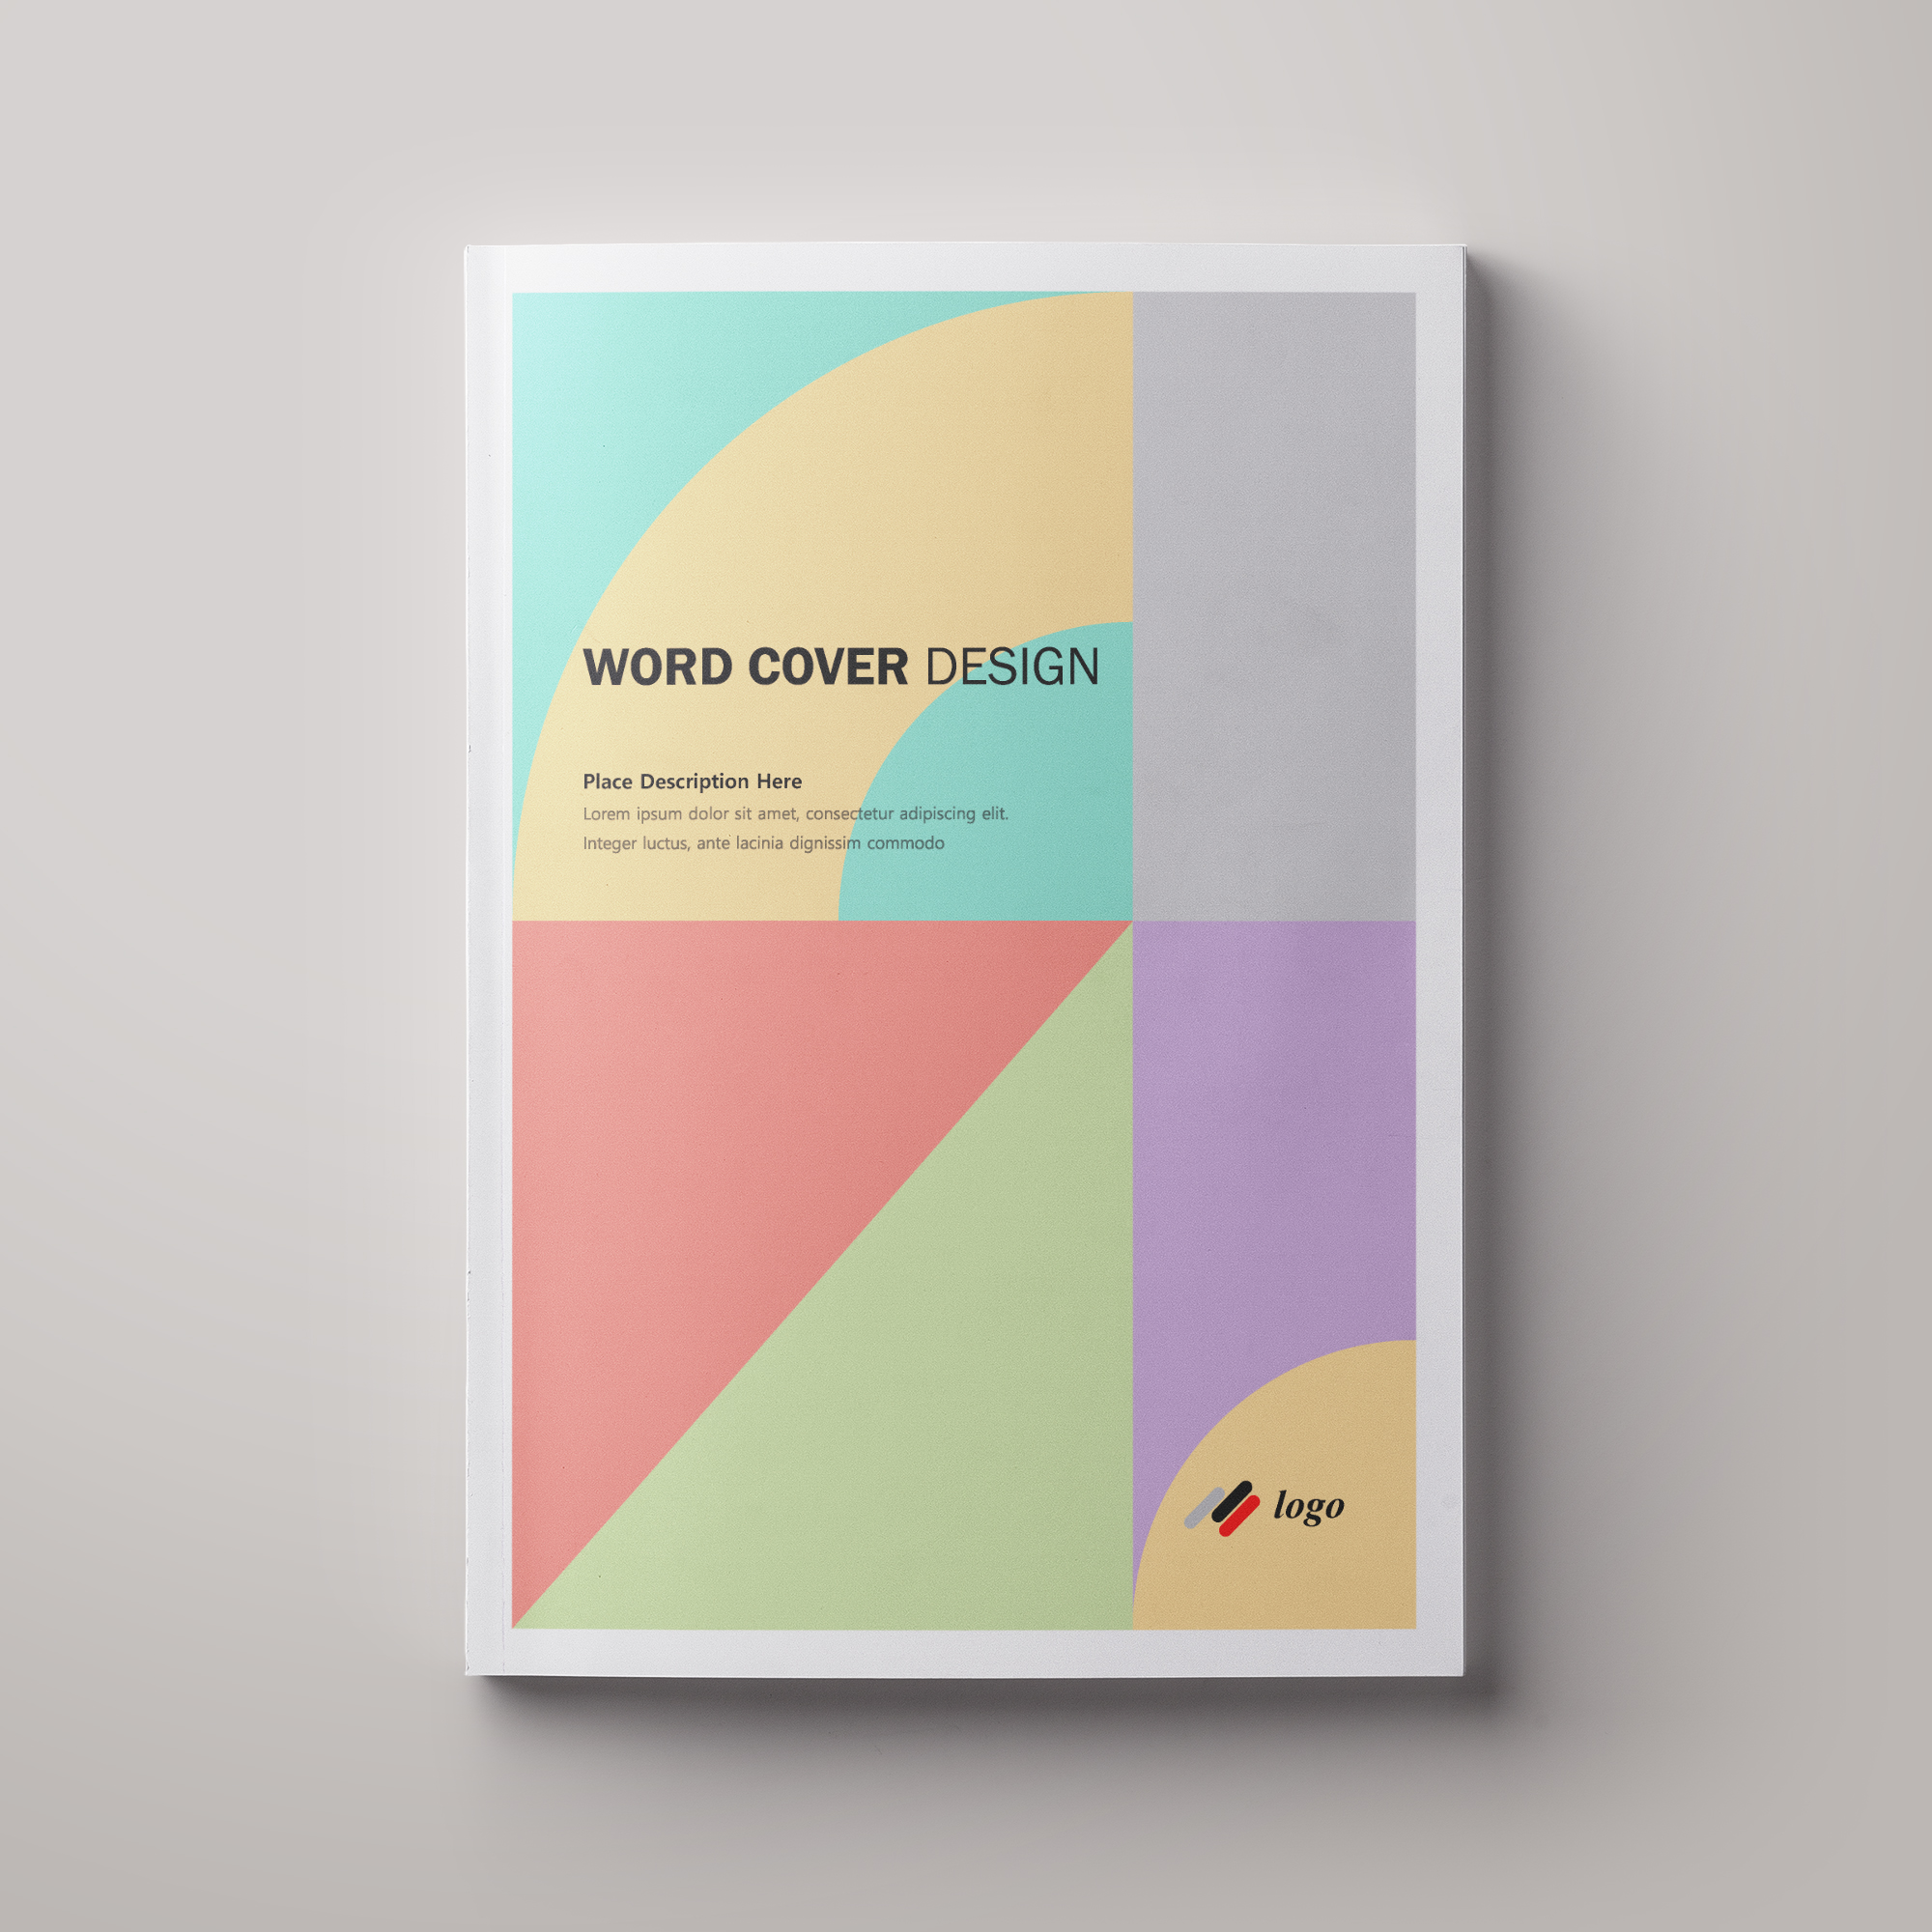 Microsoft Word Cover Templates | 159 Free Download - Word Free